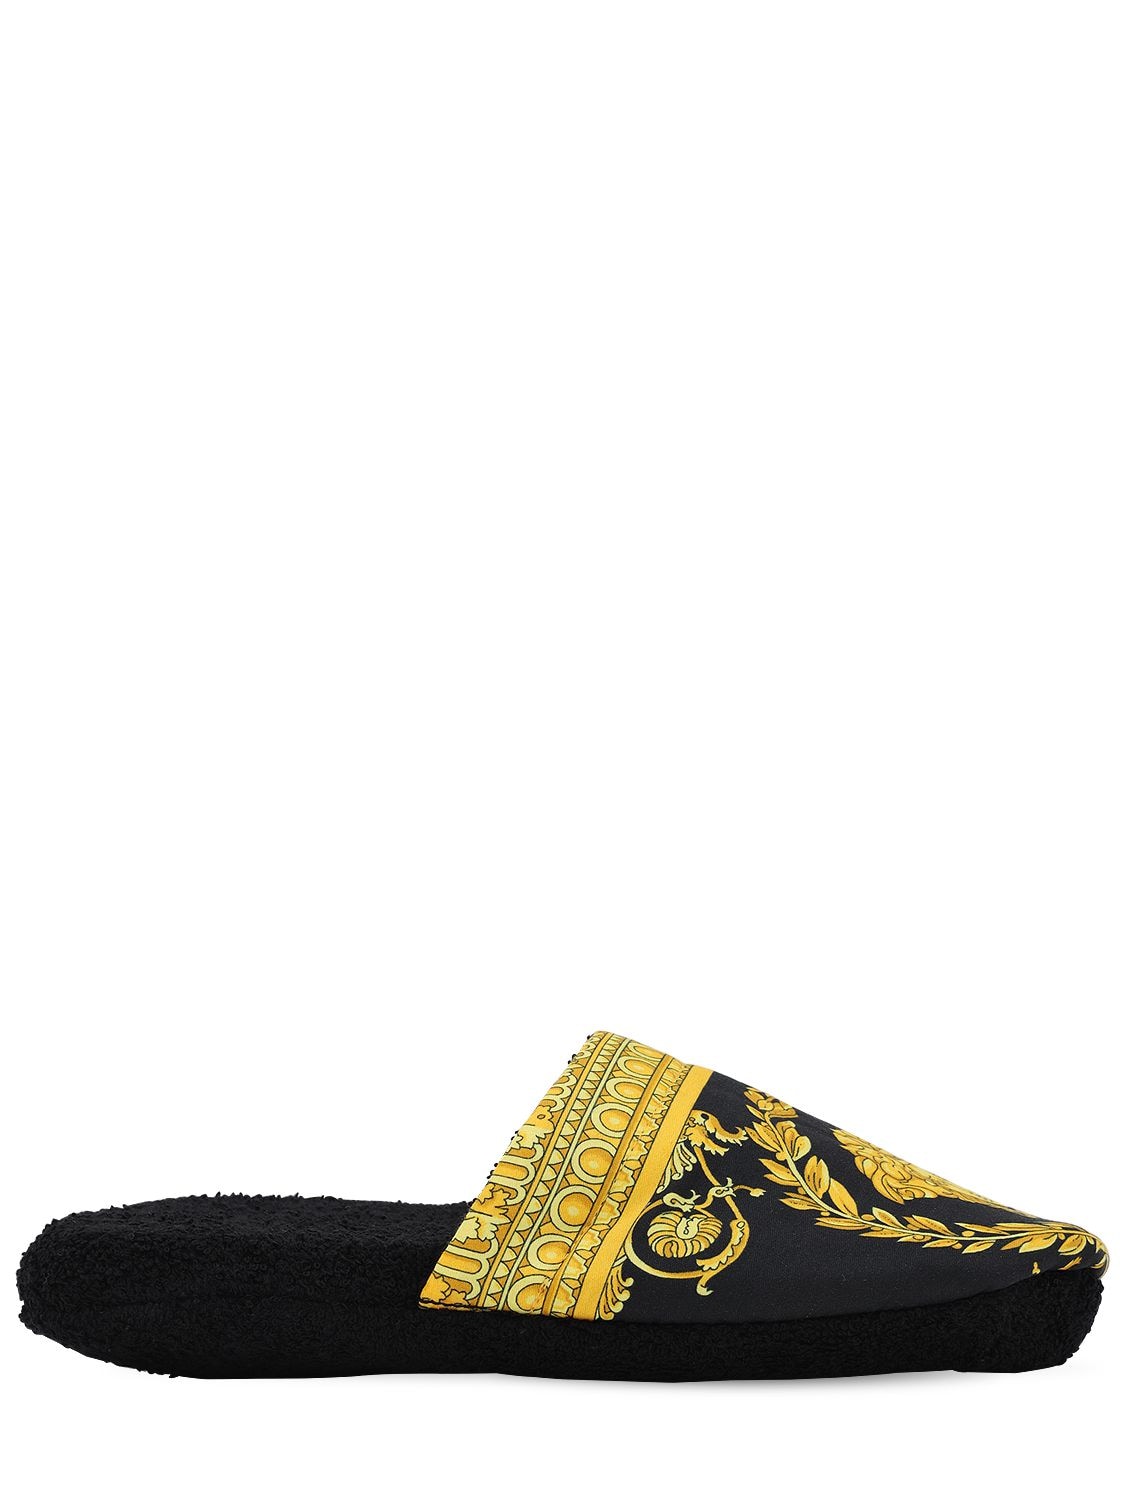 Versace Barocco & Dressing Gown Cotton Slippers In Black,gold